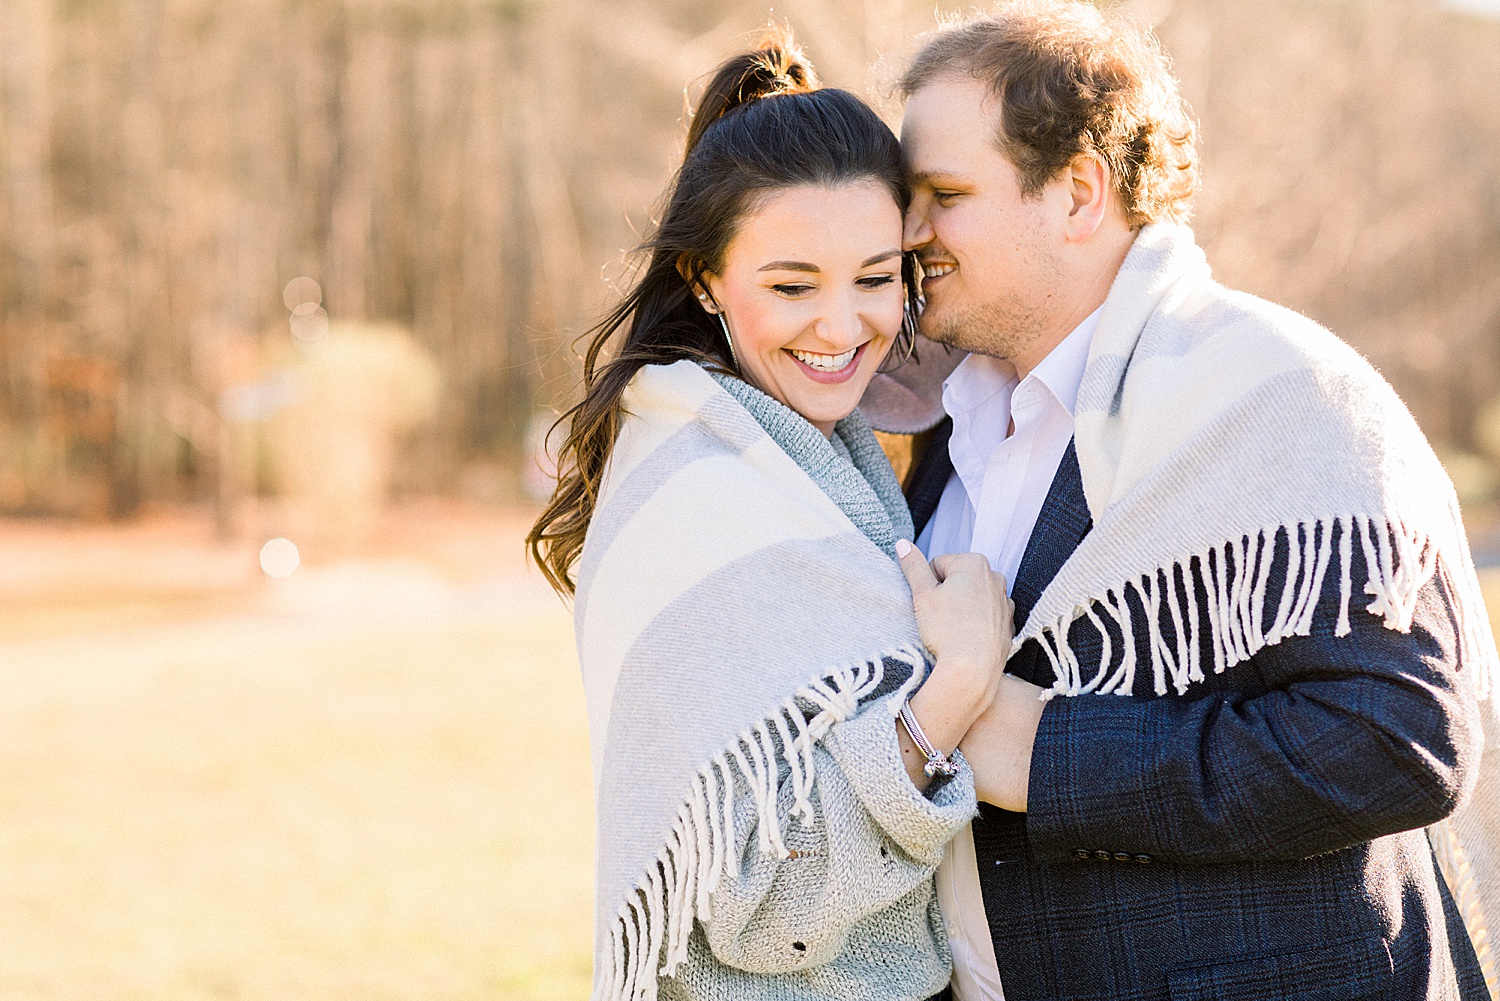 Candid moment between newly Engaged couple in Mount Laurel